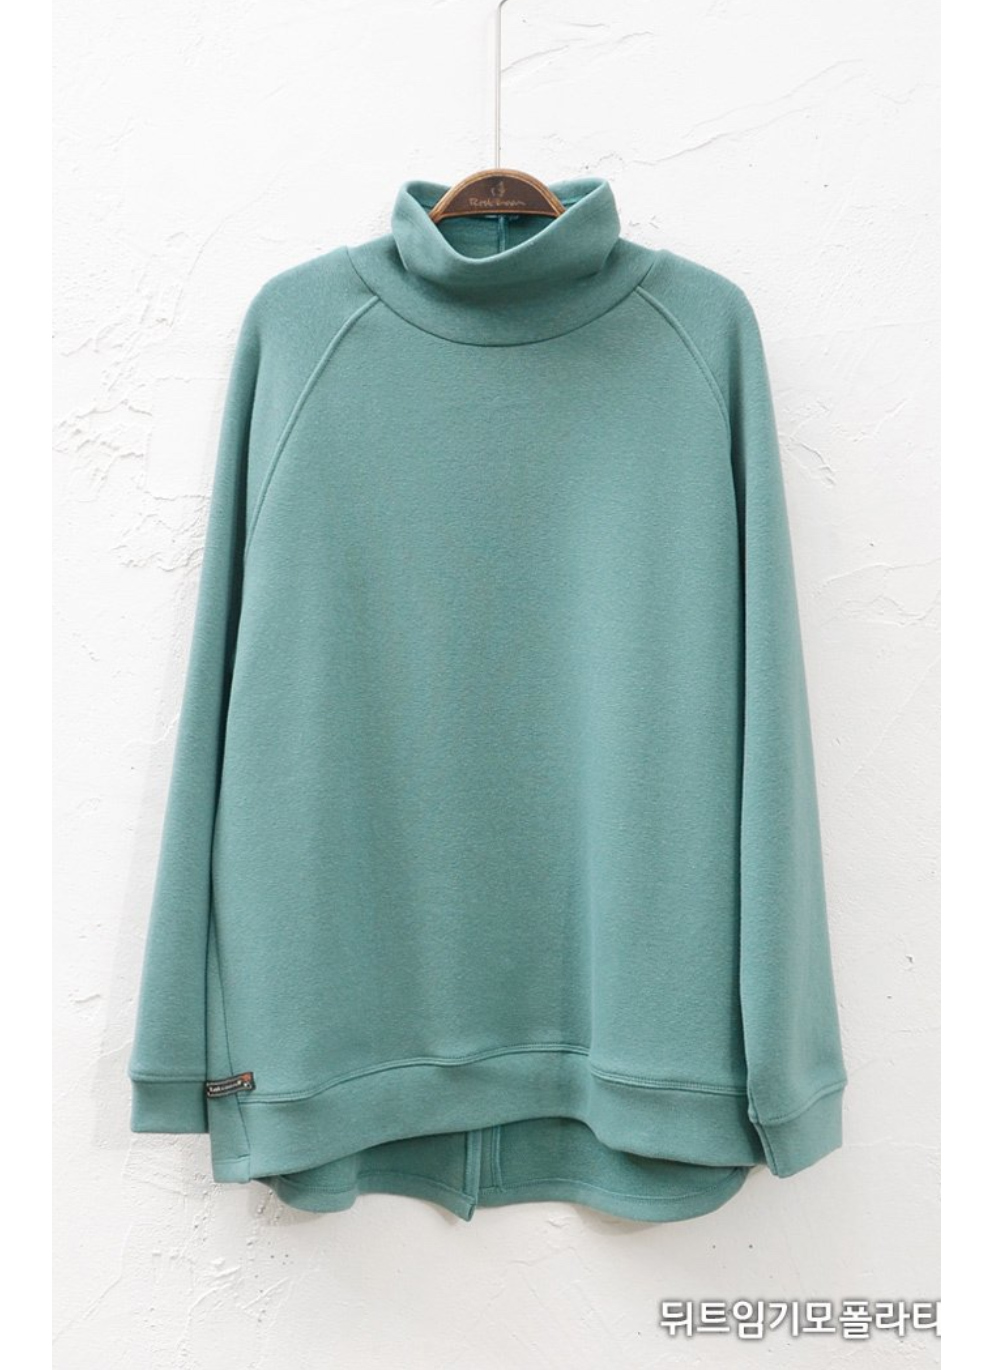 long sleeved tee mint color image-S4L6